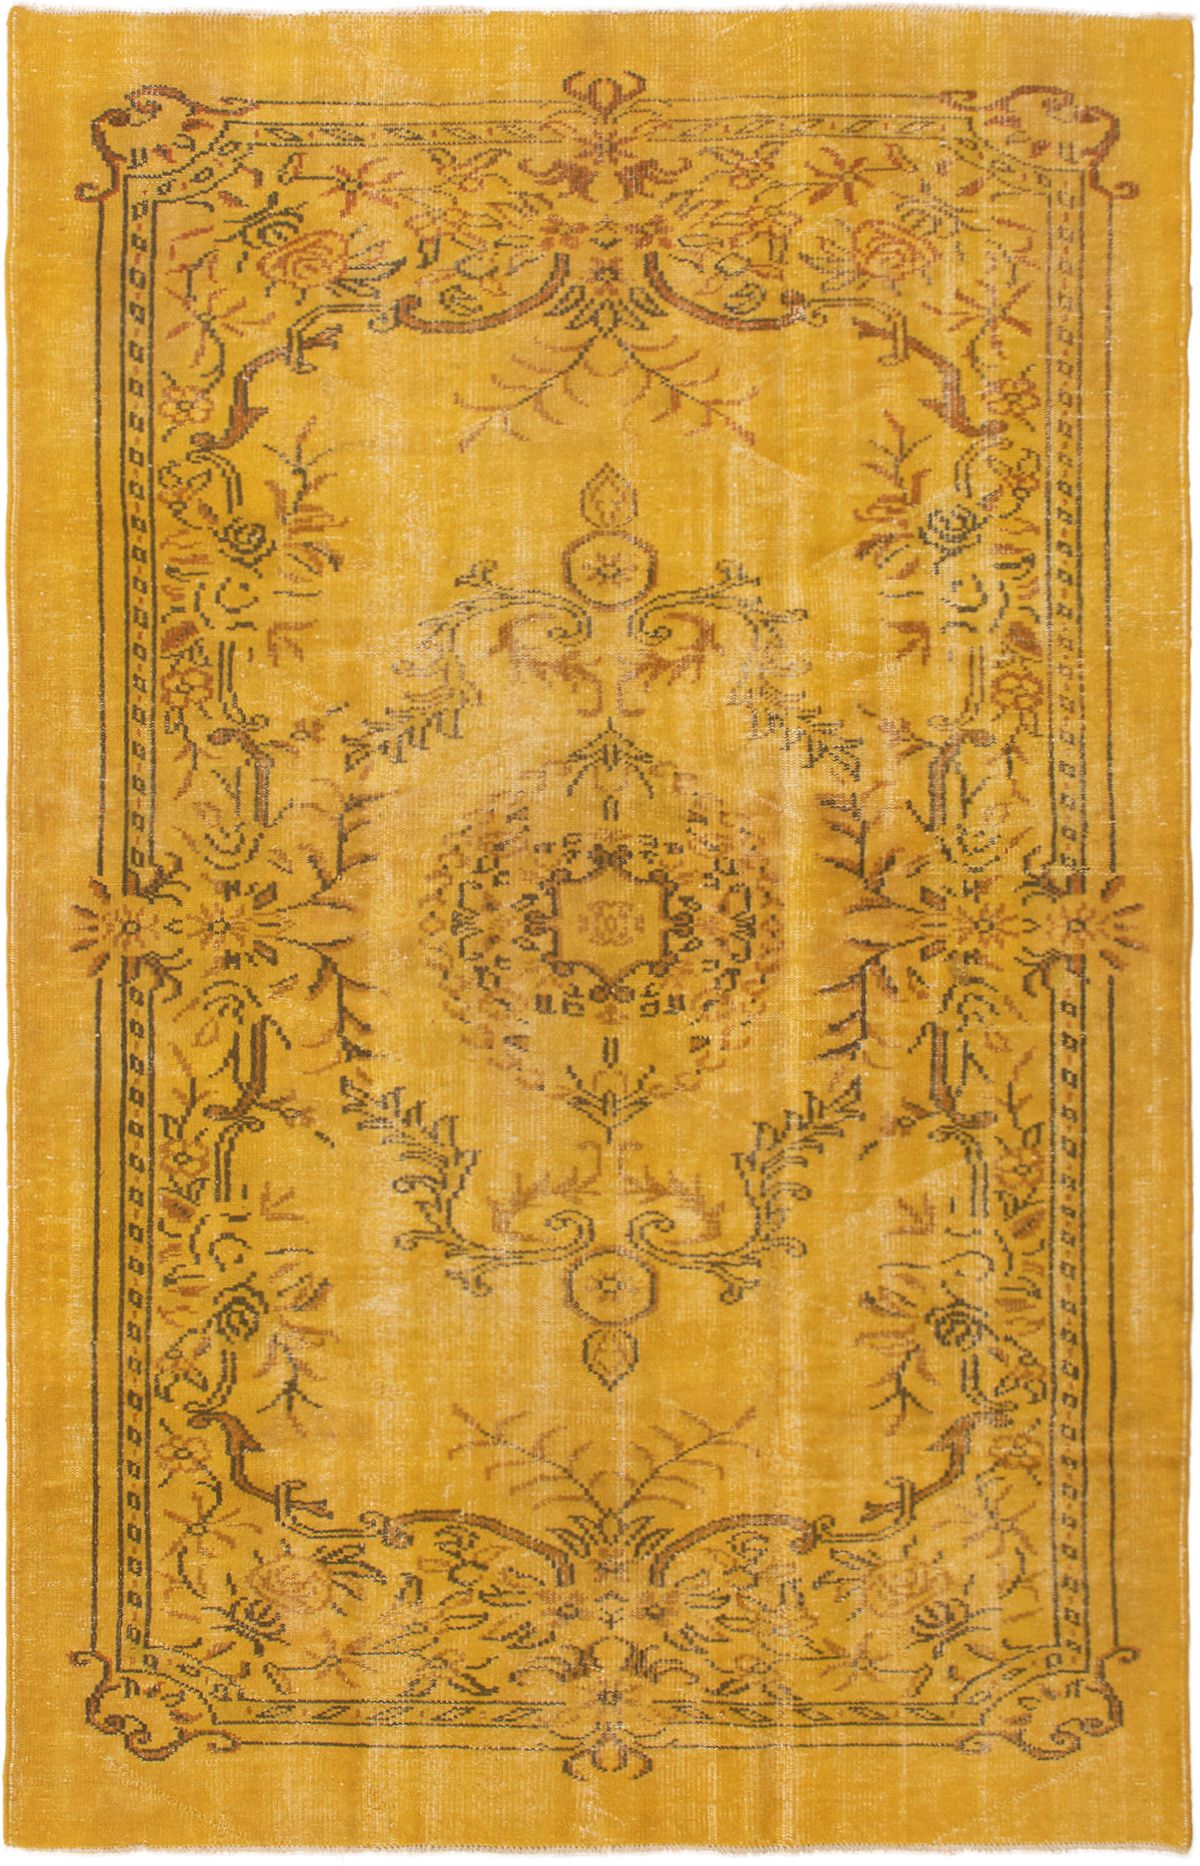 Hand-knotted Color Transition Dark Gold Wool Rug 6'2" x 9'7" Size: 6'2" x 9'7"  